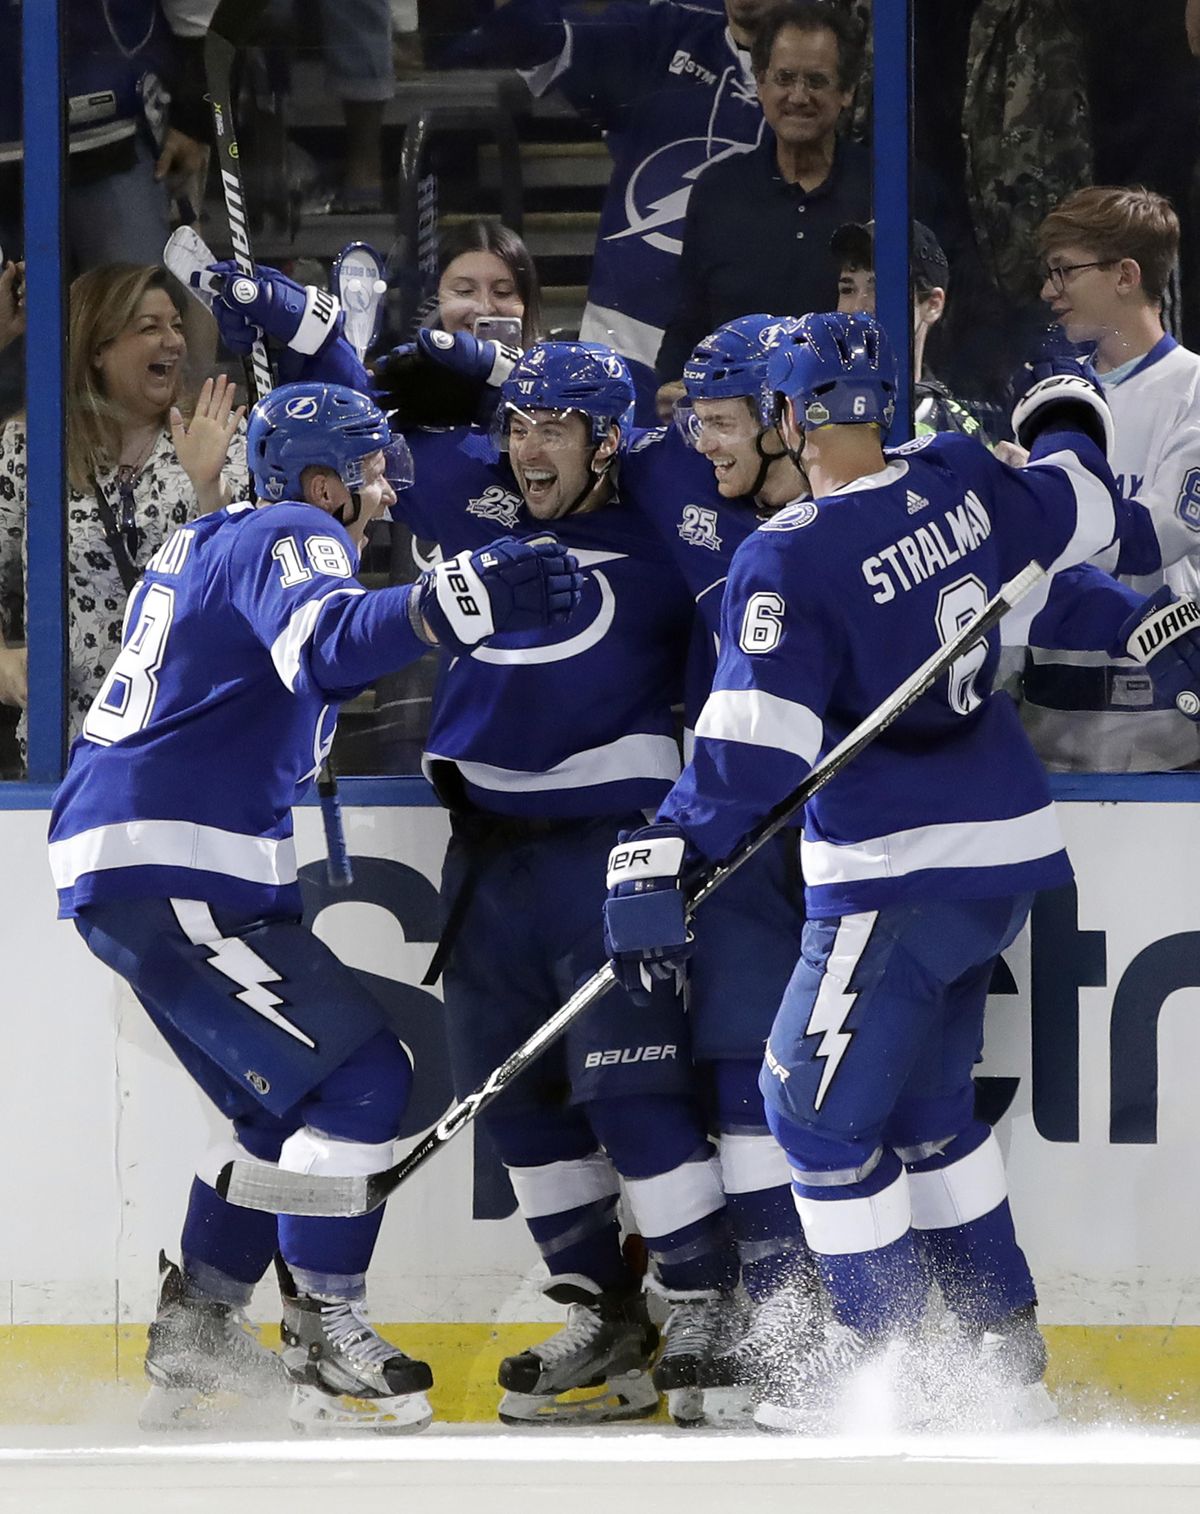 Tampa Bay Lightning center Tyler Johnson (9) celebrates his goal against the New Jersey Devils with left wing Ondrej Palat (18), center Brayden Point (21), and defenseman Anton Stralman (6) during the first period of Game 1 of an NHL first-round hockey playoff series Thursday, April 12, 2018, in Tampa, Fla. (Chris O’Meara / Associated Press)